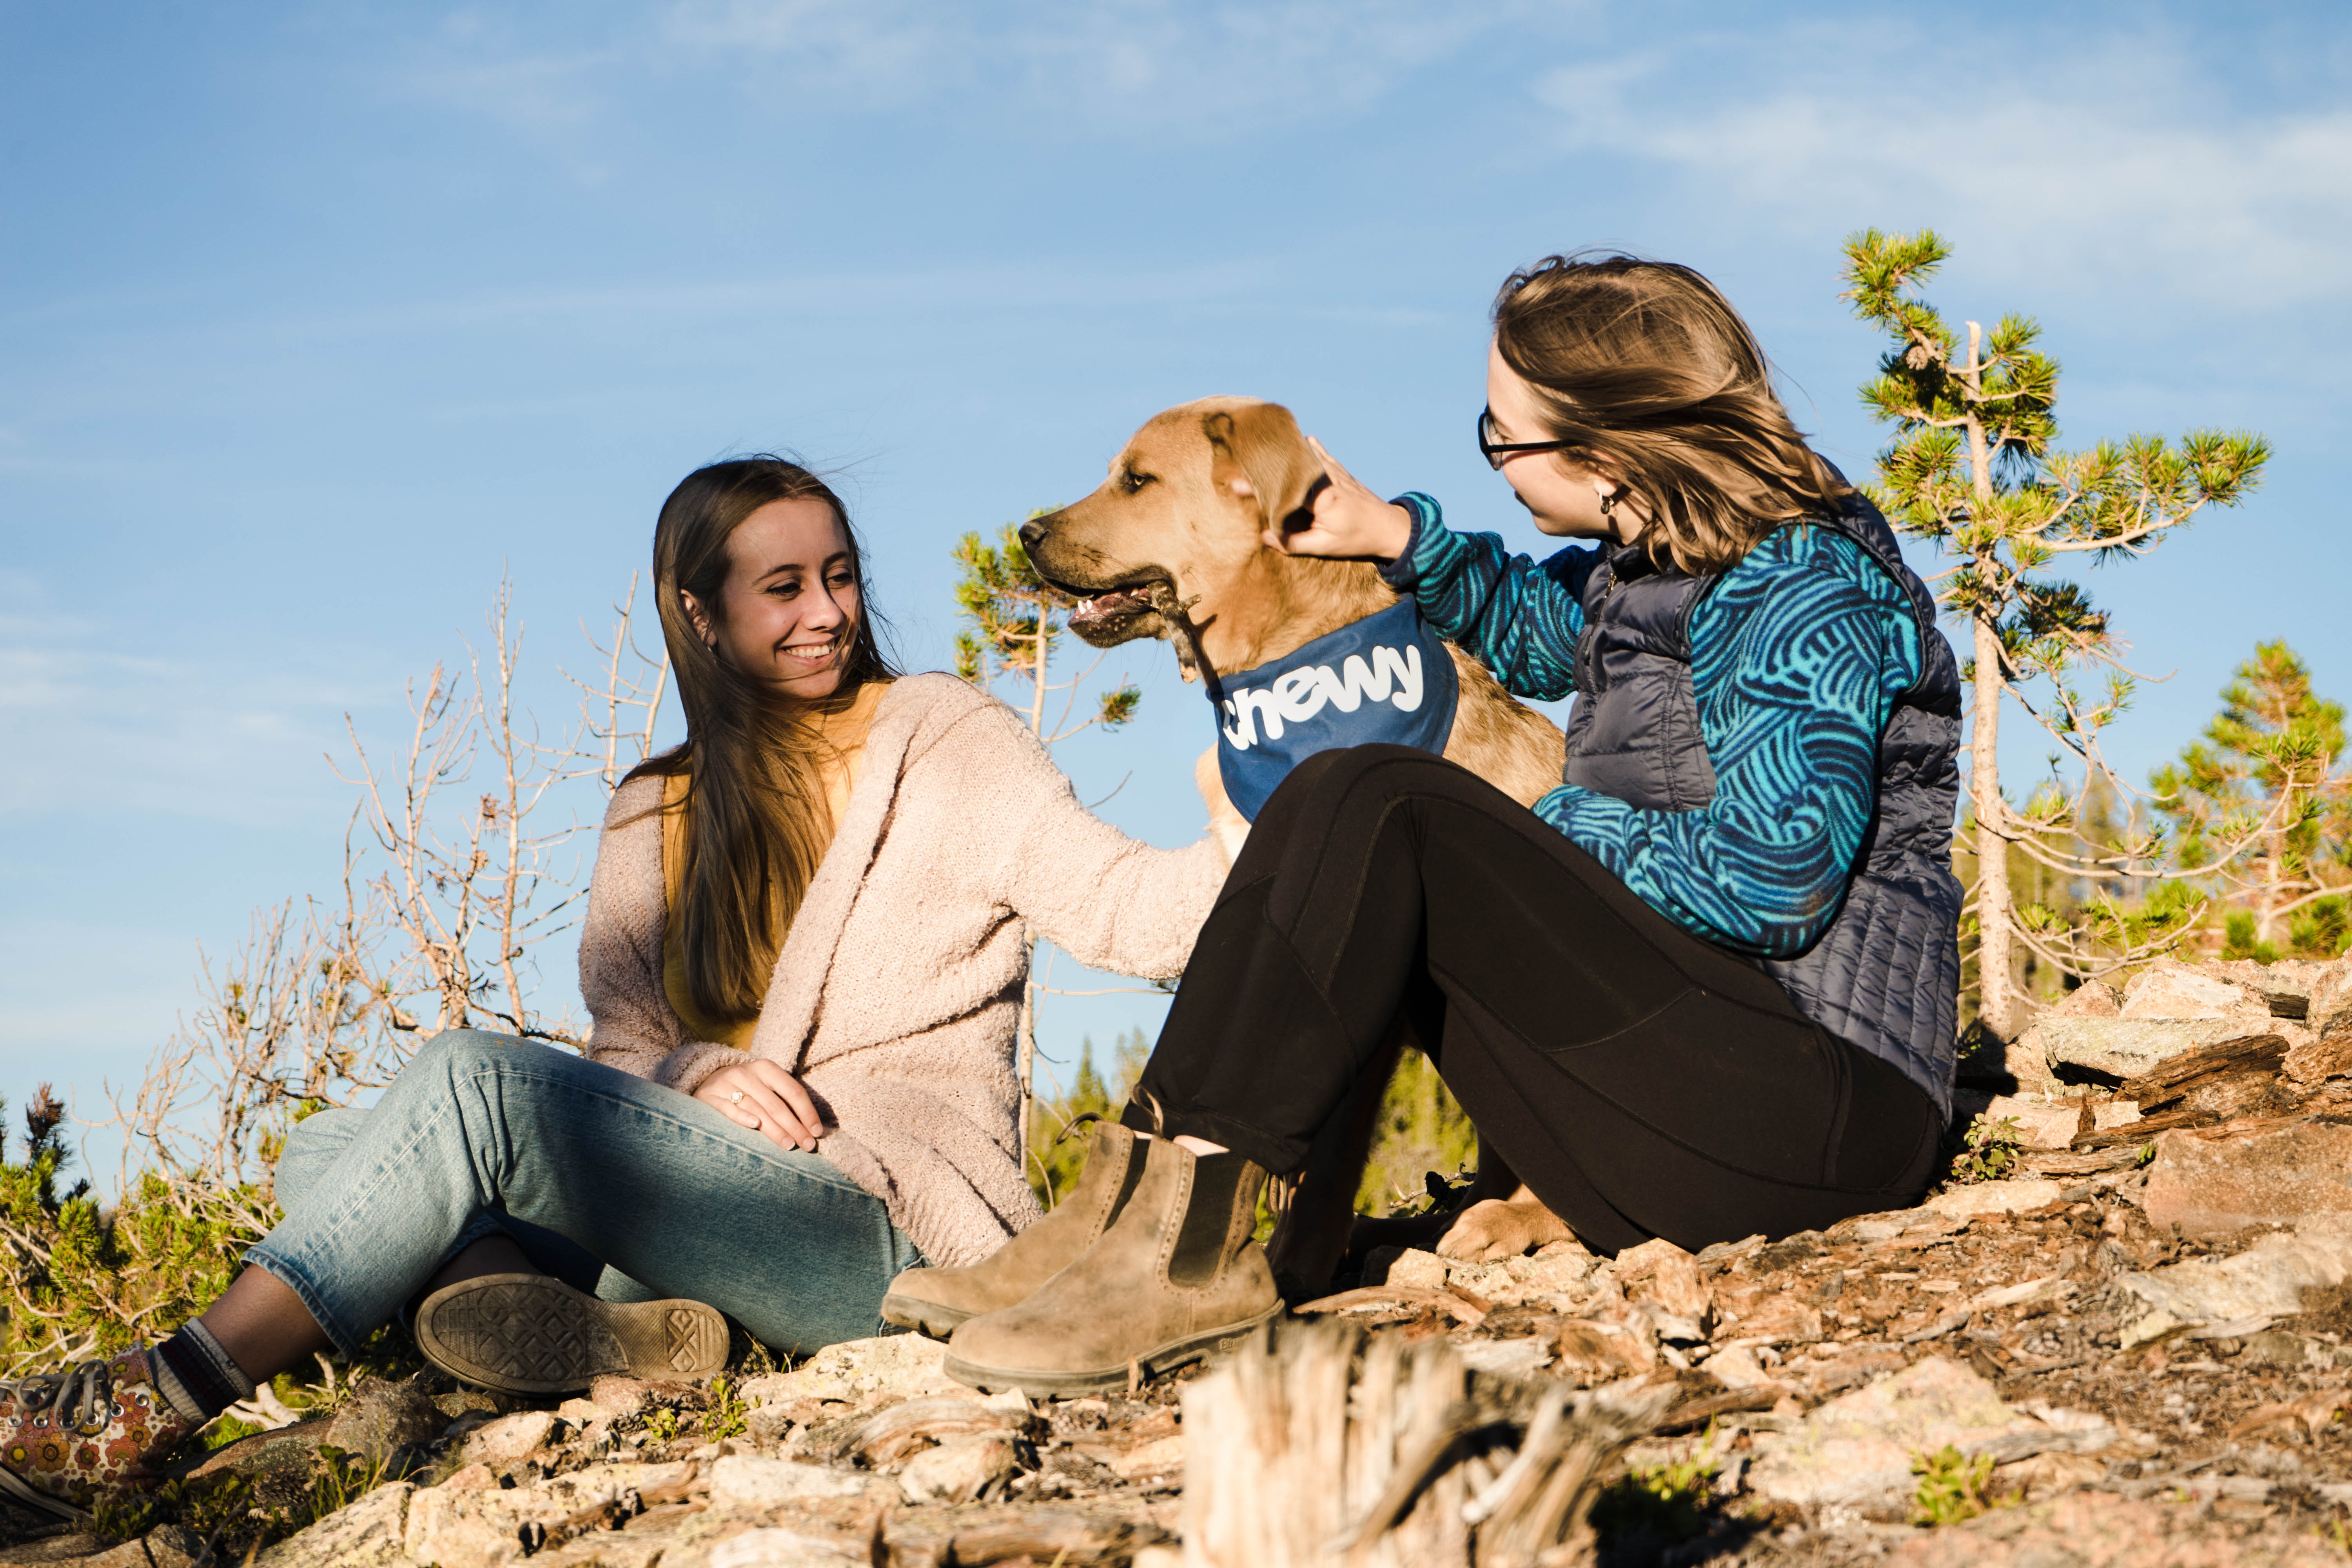 two women and a dog on a rocky surface